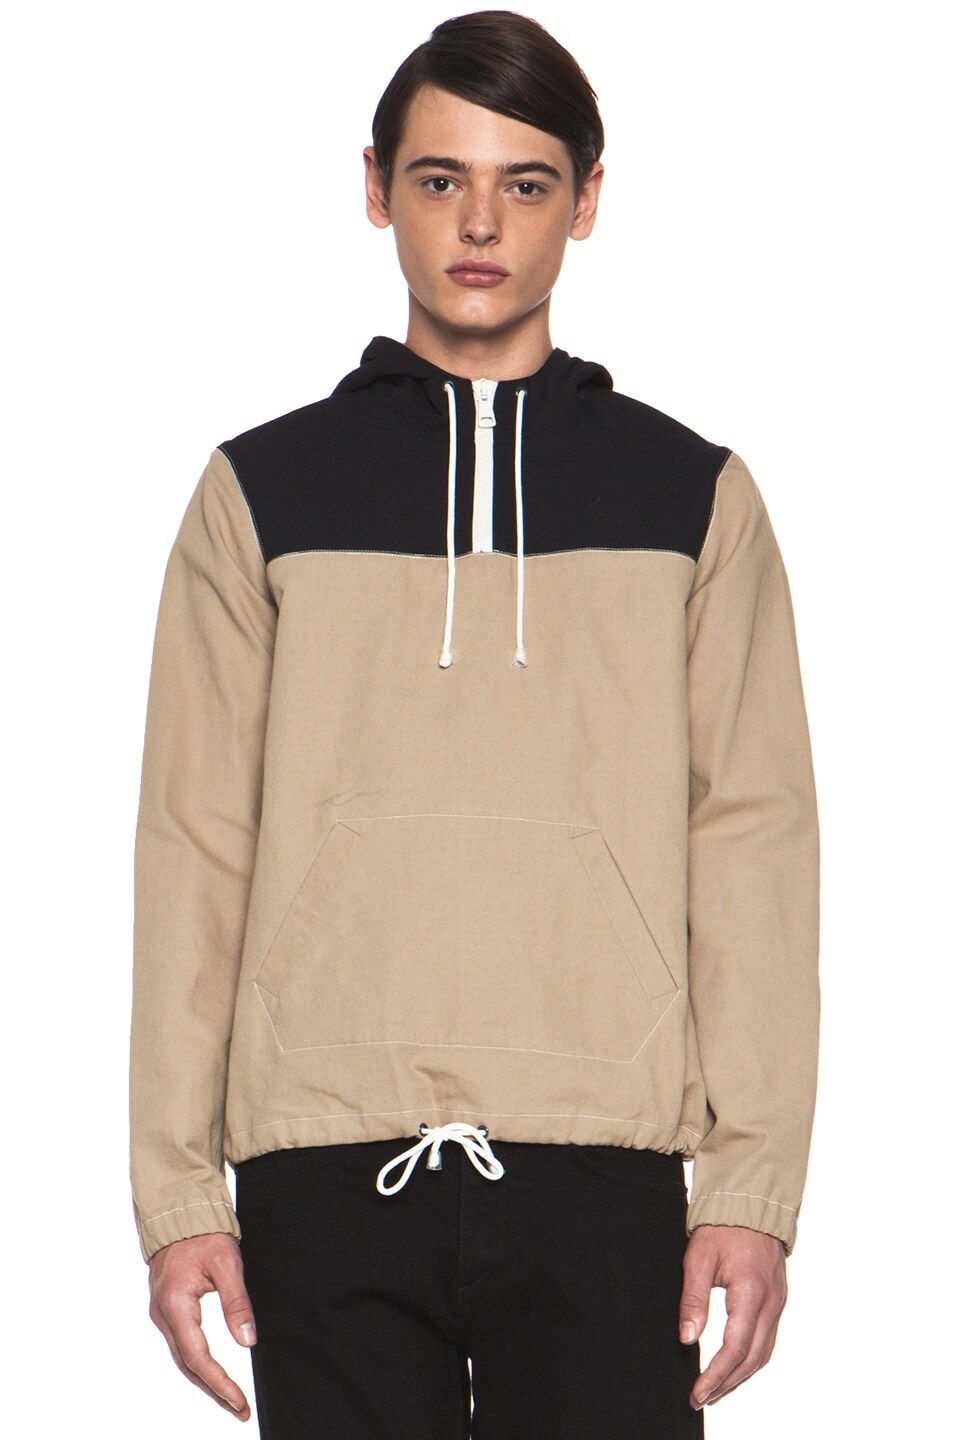 Image 1 of THIS IS NOT A POLO SHIRT. by band of outsiders 1/2 Pullover Hoodie in Khaki